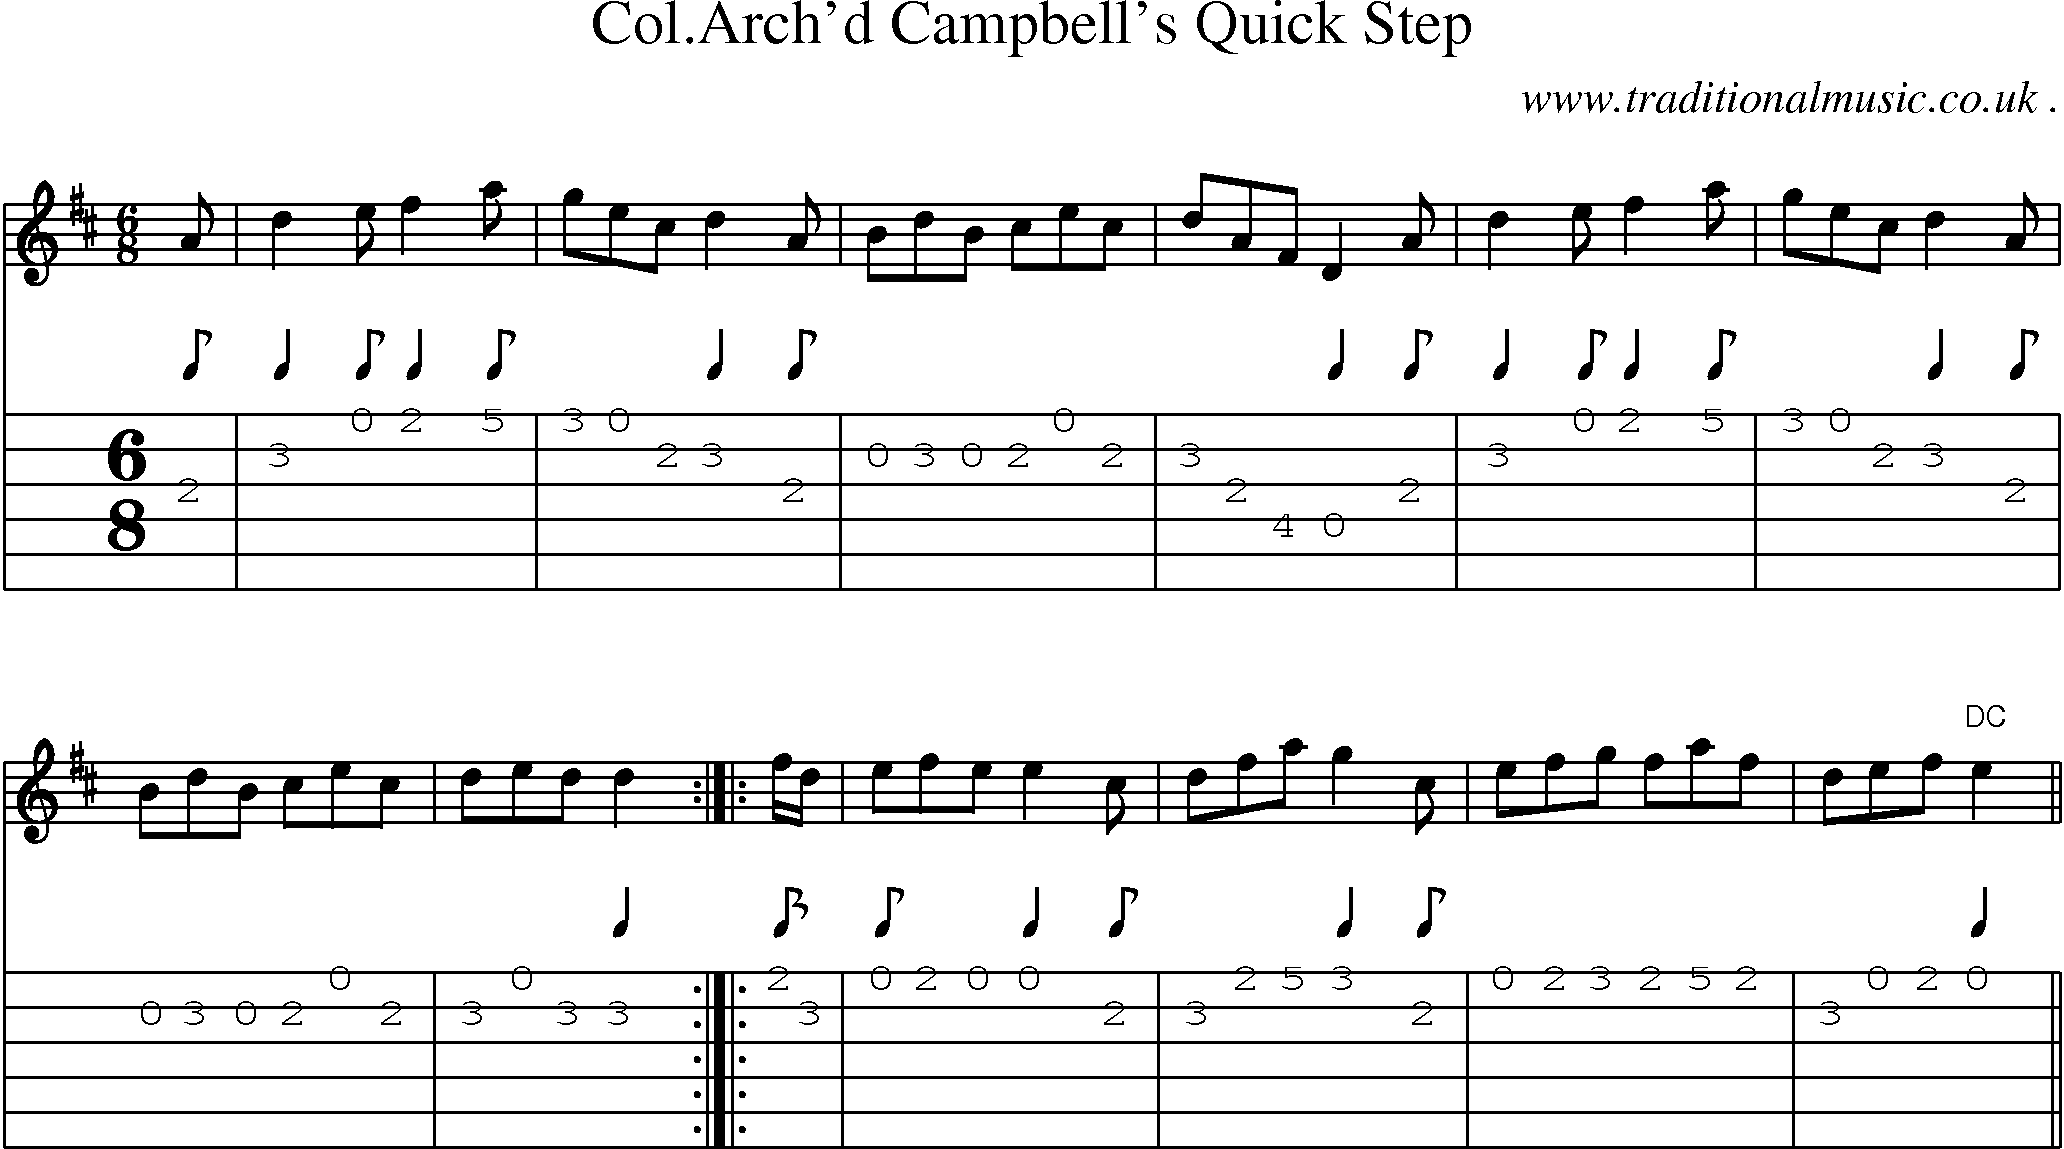 Sheet-Music and Guitar Tabs for Colarchd Campbells Quick Step